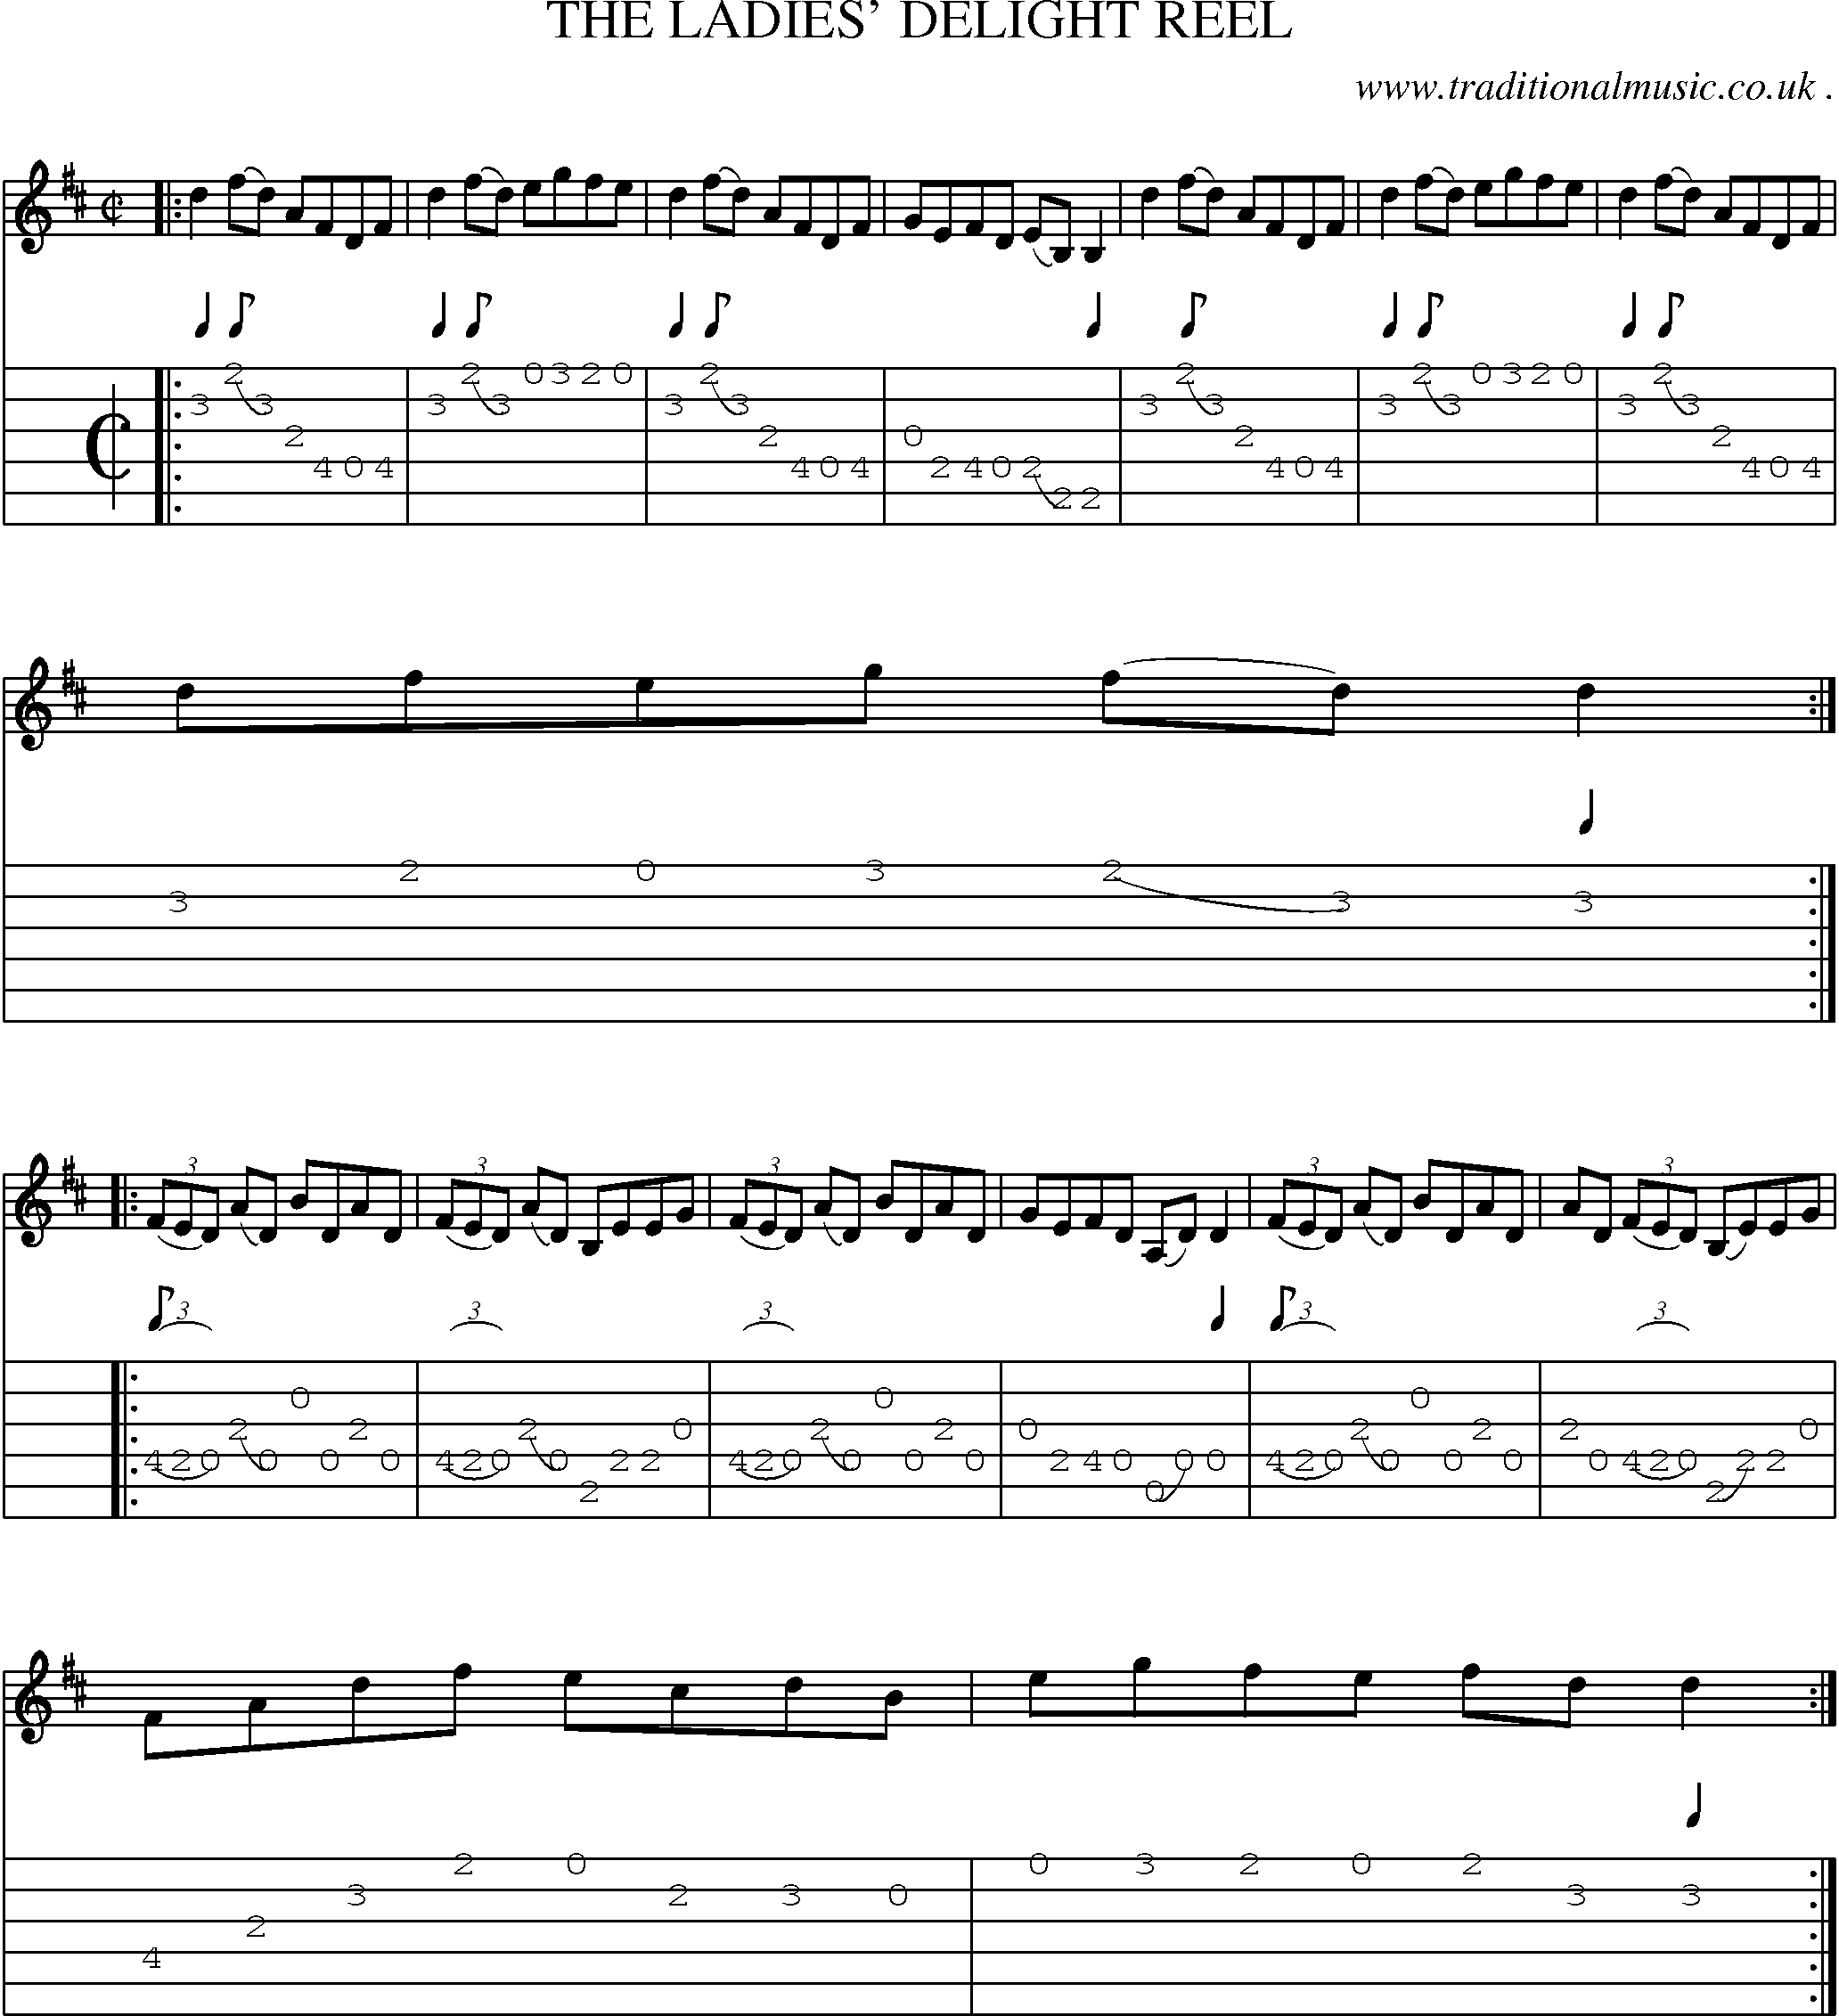 Sheet-Music and Guitar Tabs for The Ladies Delight Reel